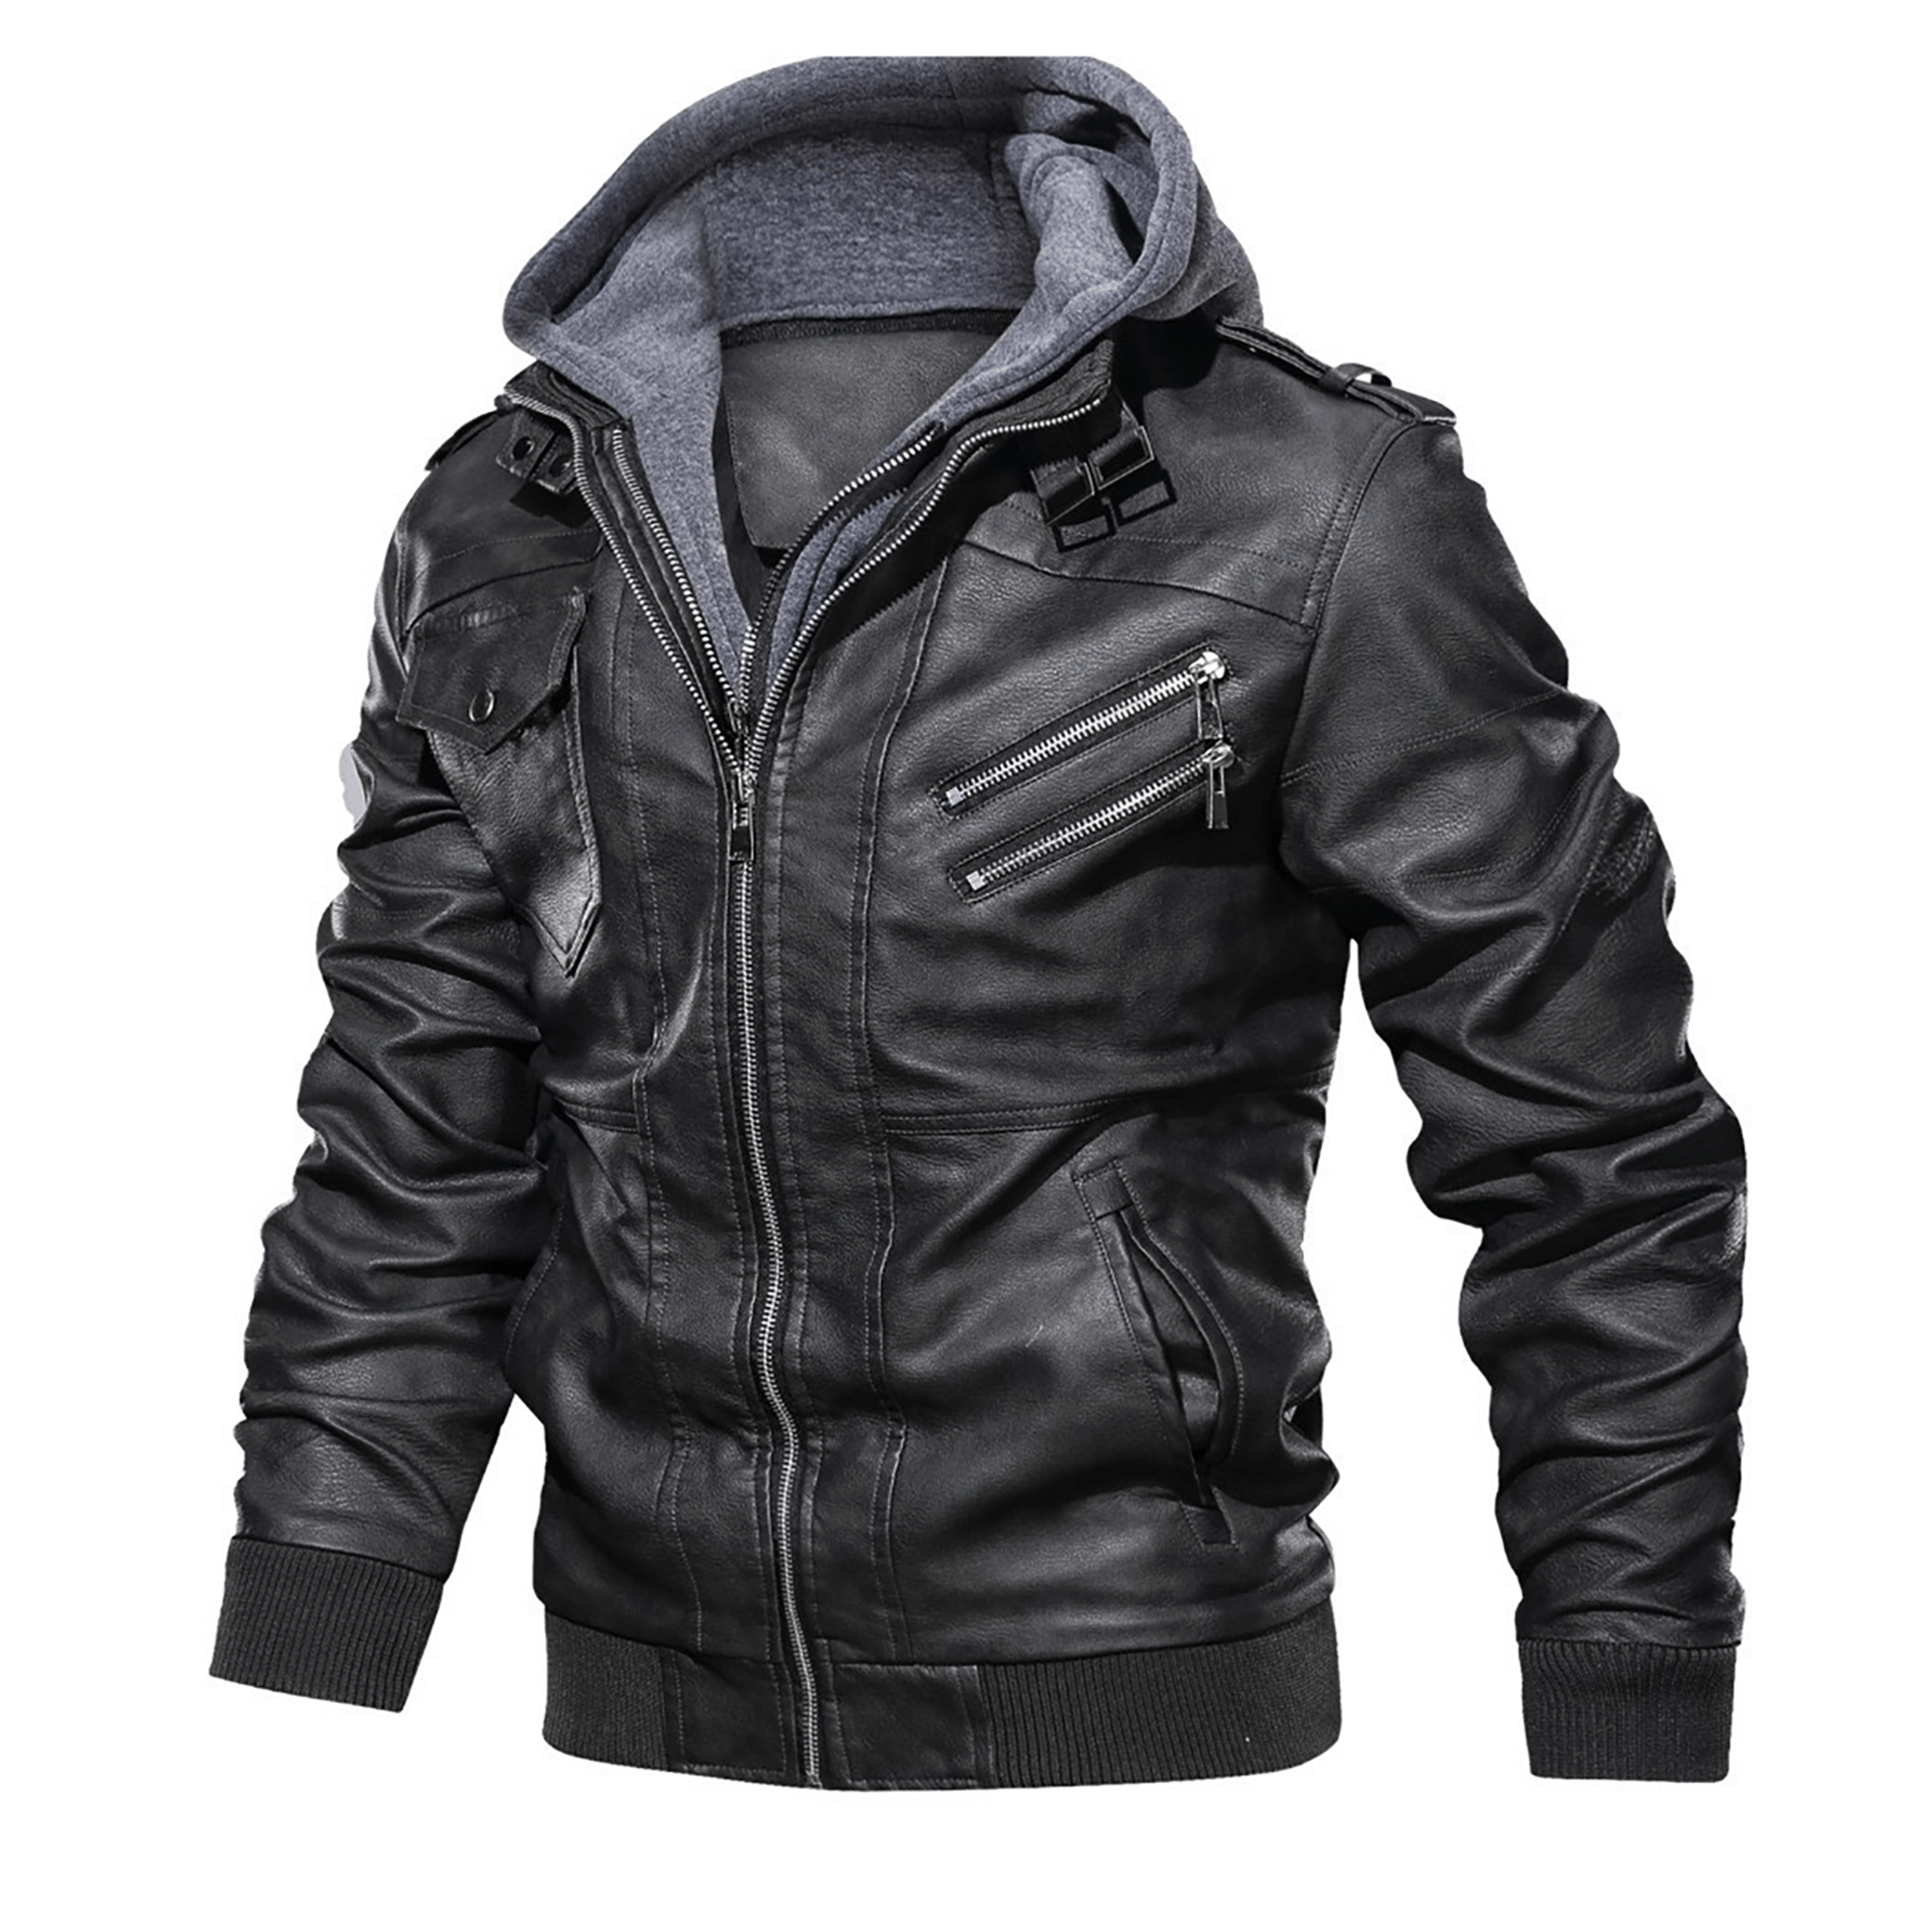 Top leather jackets and latest products 225